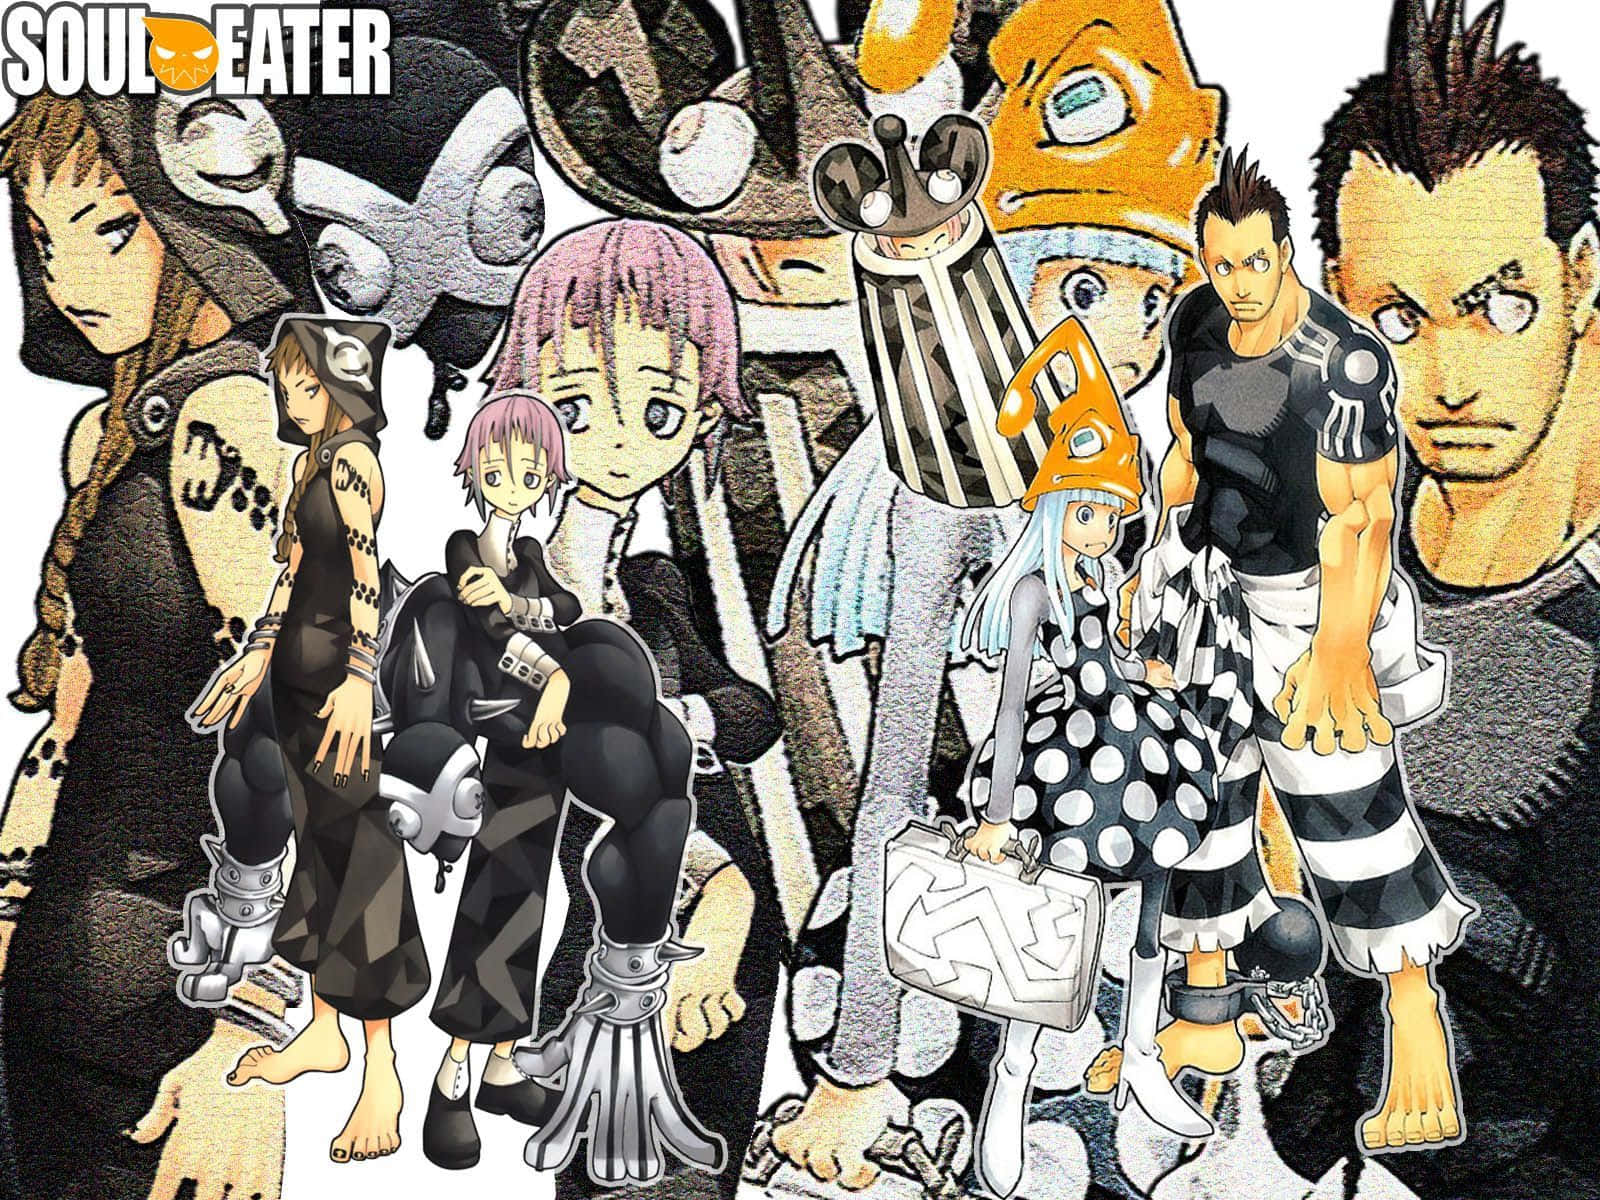 Follow the adventures of the meisters and their weapon partners in the Soul Eater manga series! Wallpaper